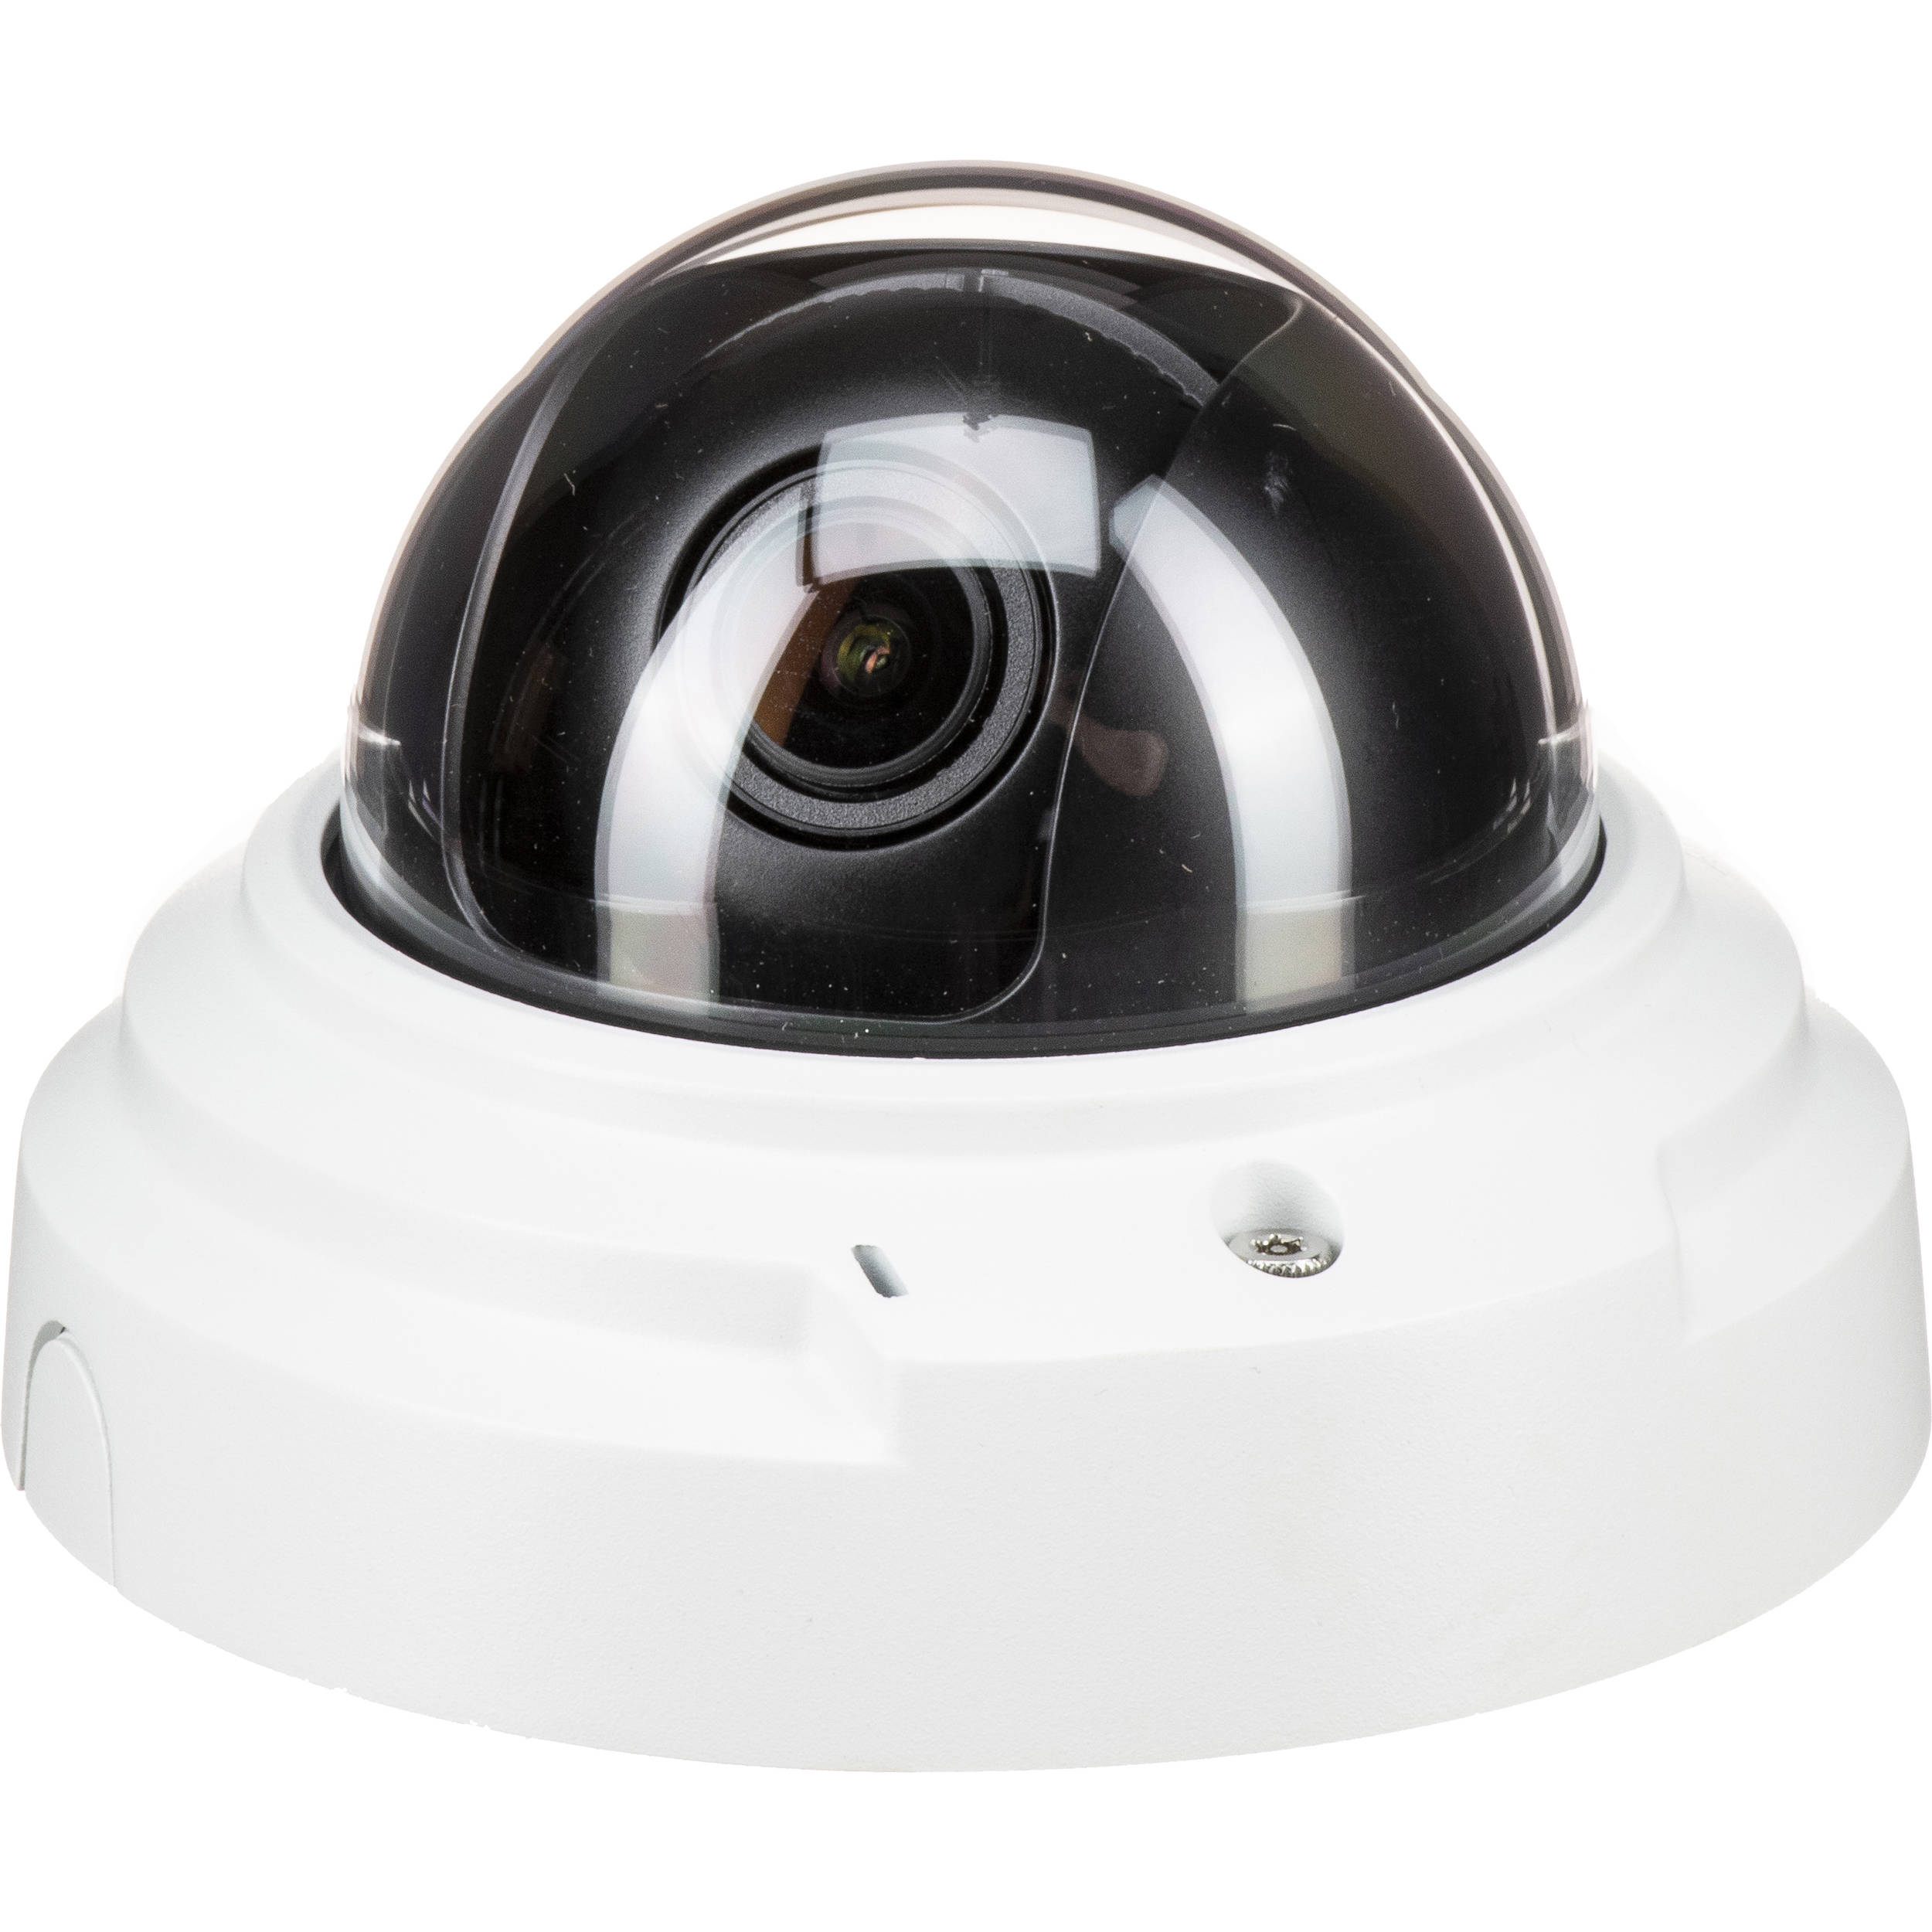 factory reset axis dome camera